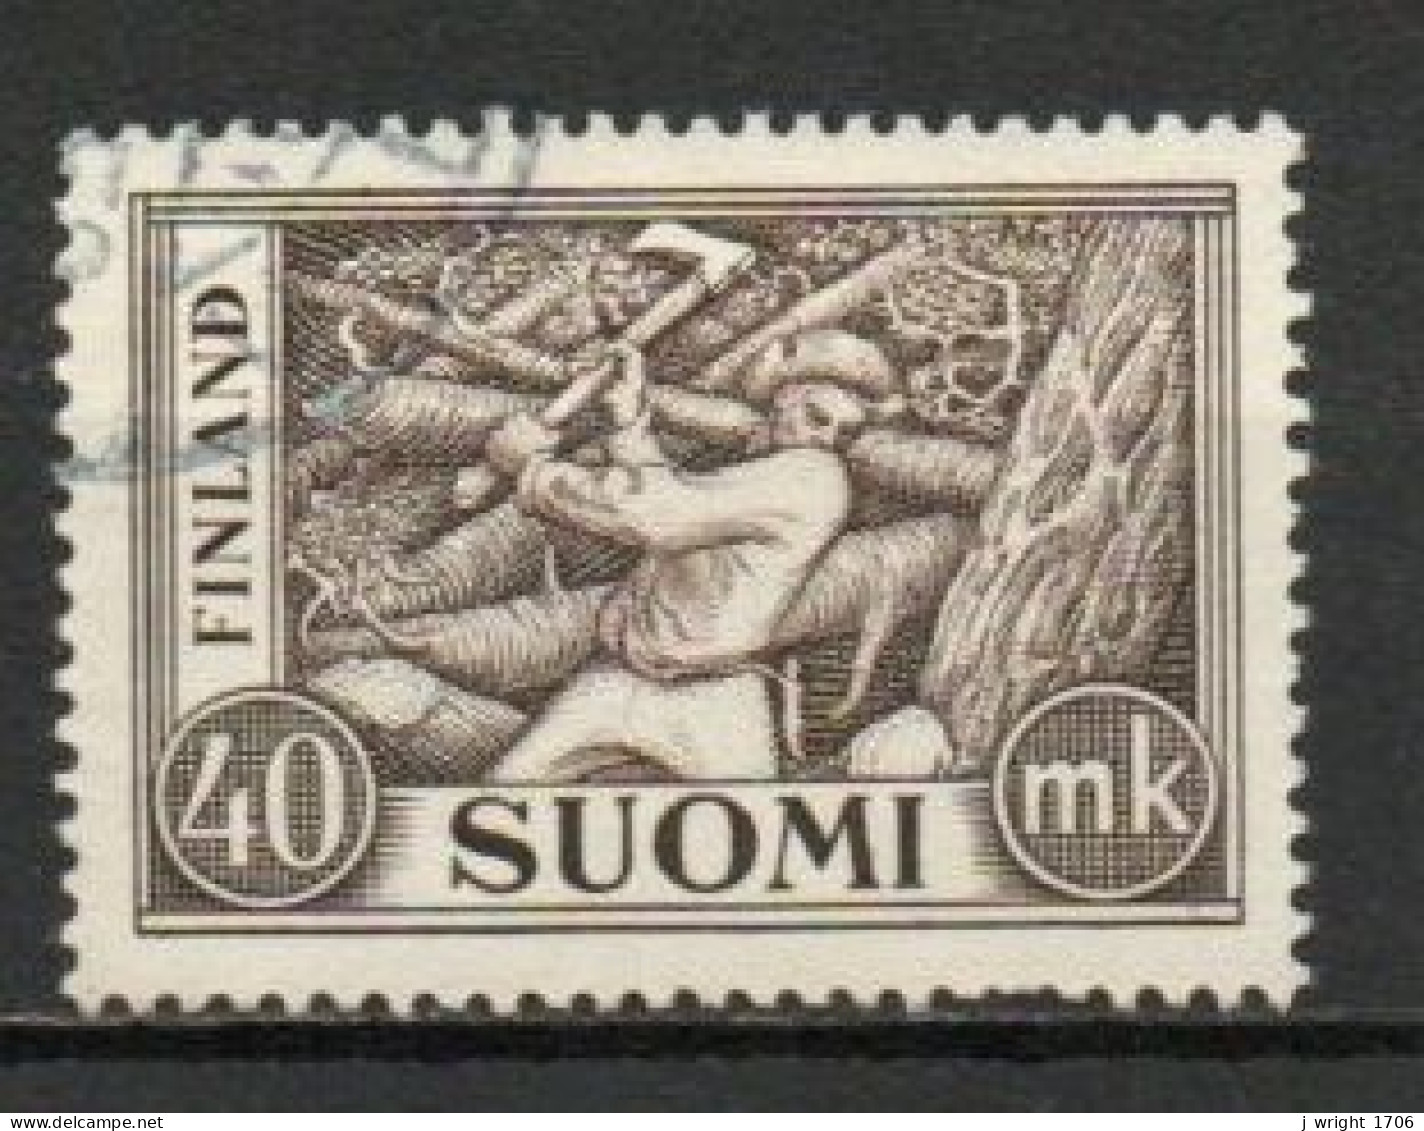 Finland, 1952, Wood Cutter, 40mk, USED - Used Stamps